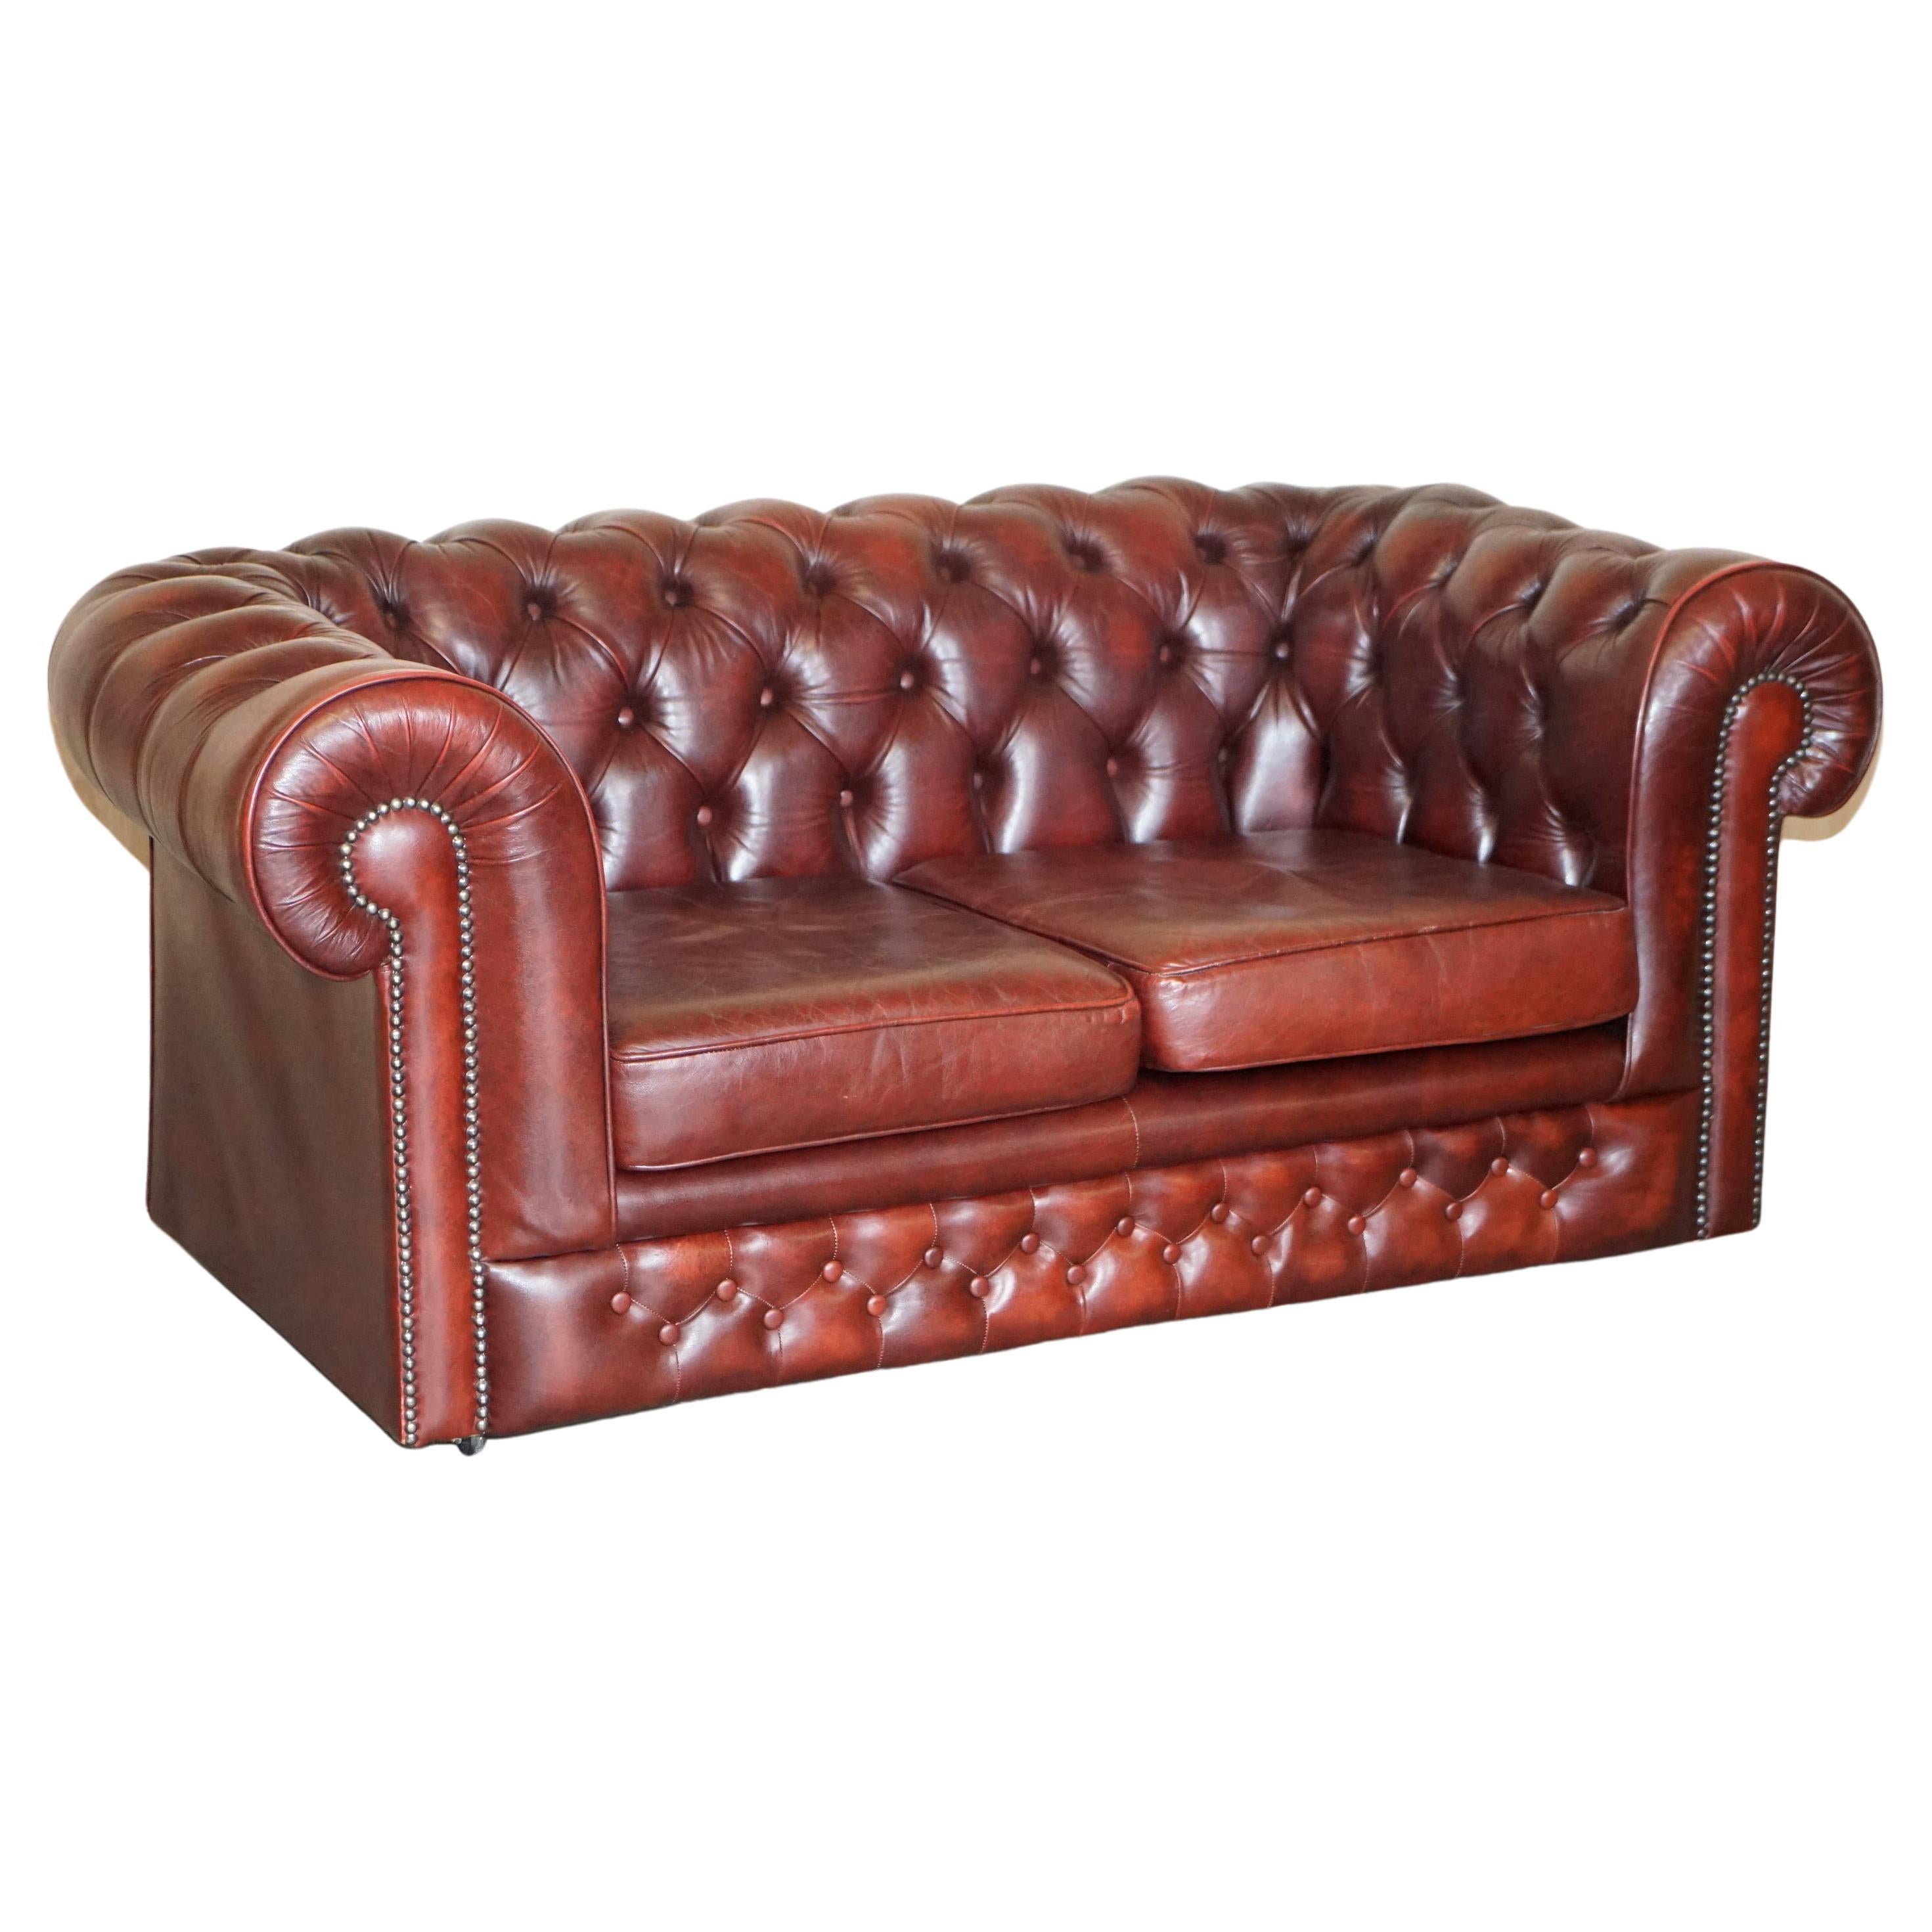 Lovely Vintage Oxblood Leather Chesterfield Gentleman's Club Sofa Part of Suite For Sale